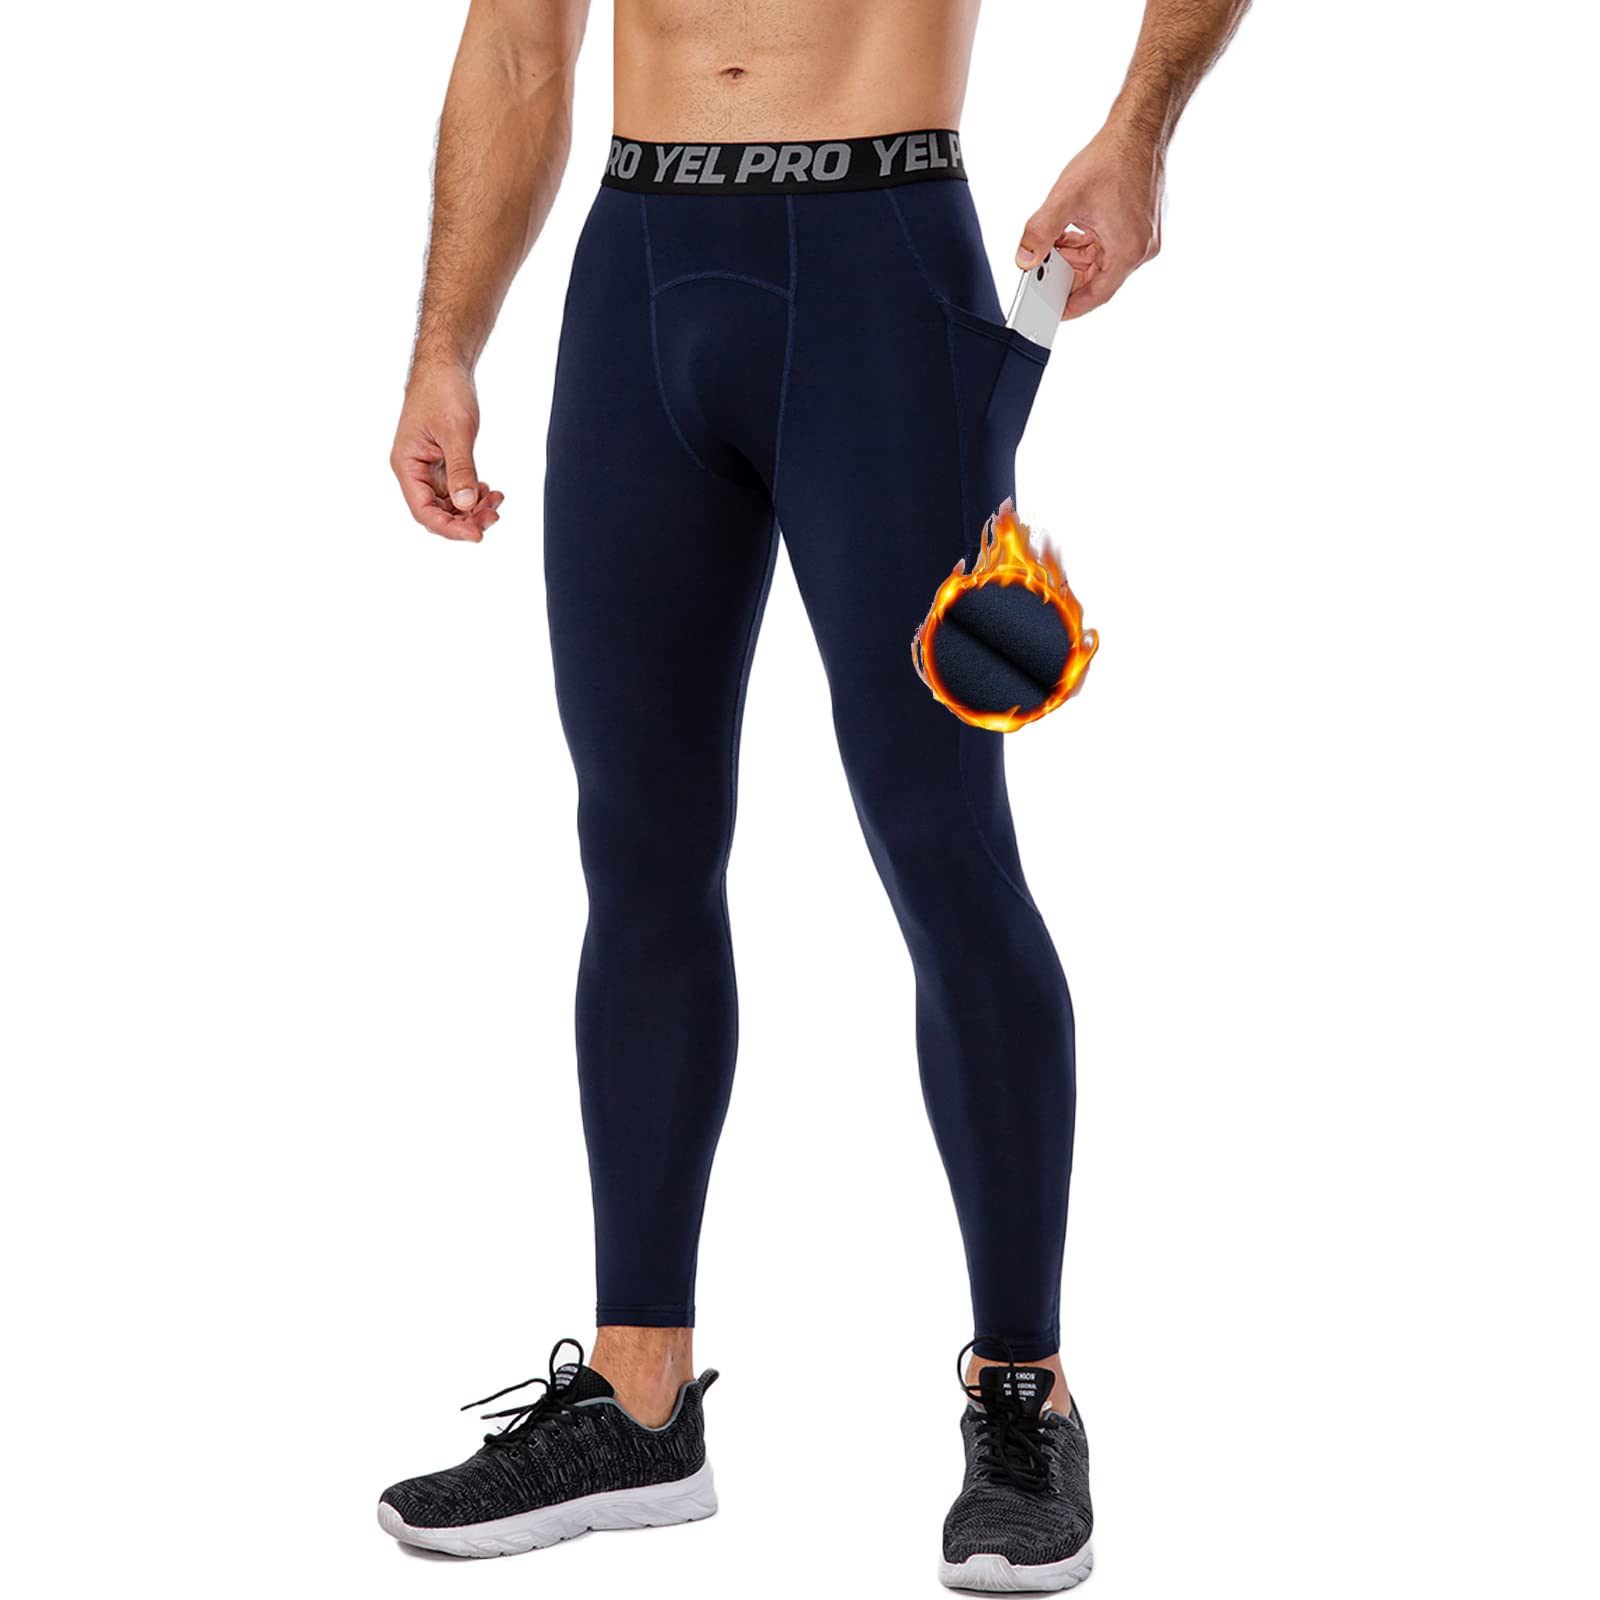 SPVISE Dark Gray Men's Warm Compression Pants Thermal Underwear Bottoms  Athletic Workout Running Tights Leggings with Pocket at  Men's  Clothing store